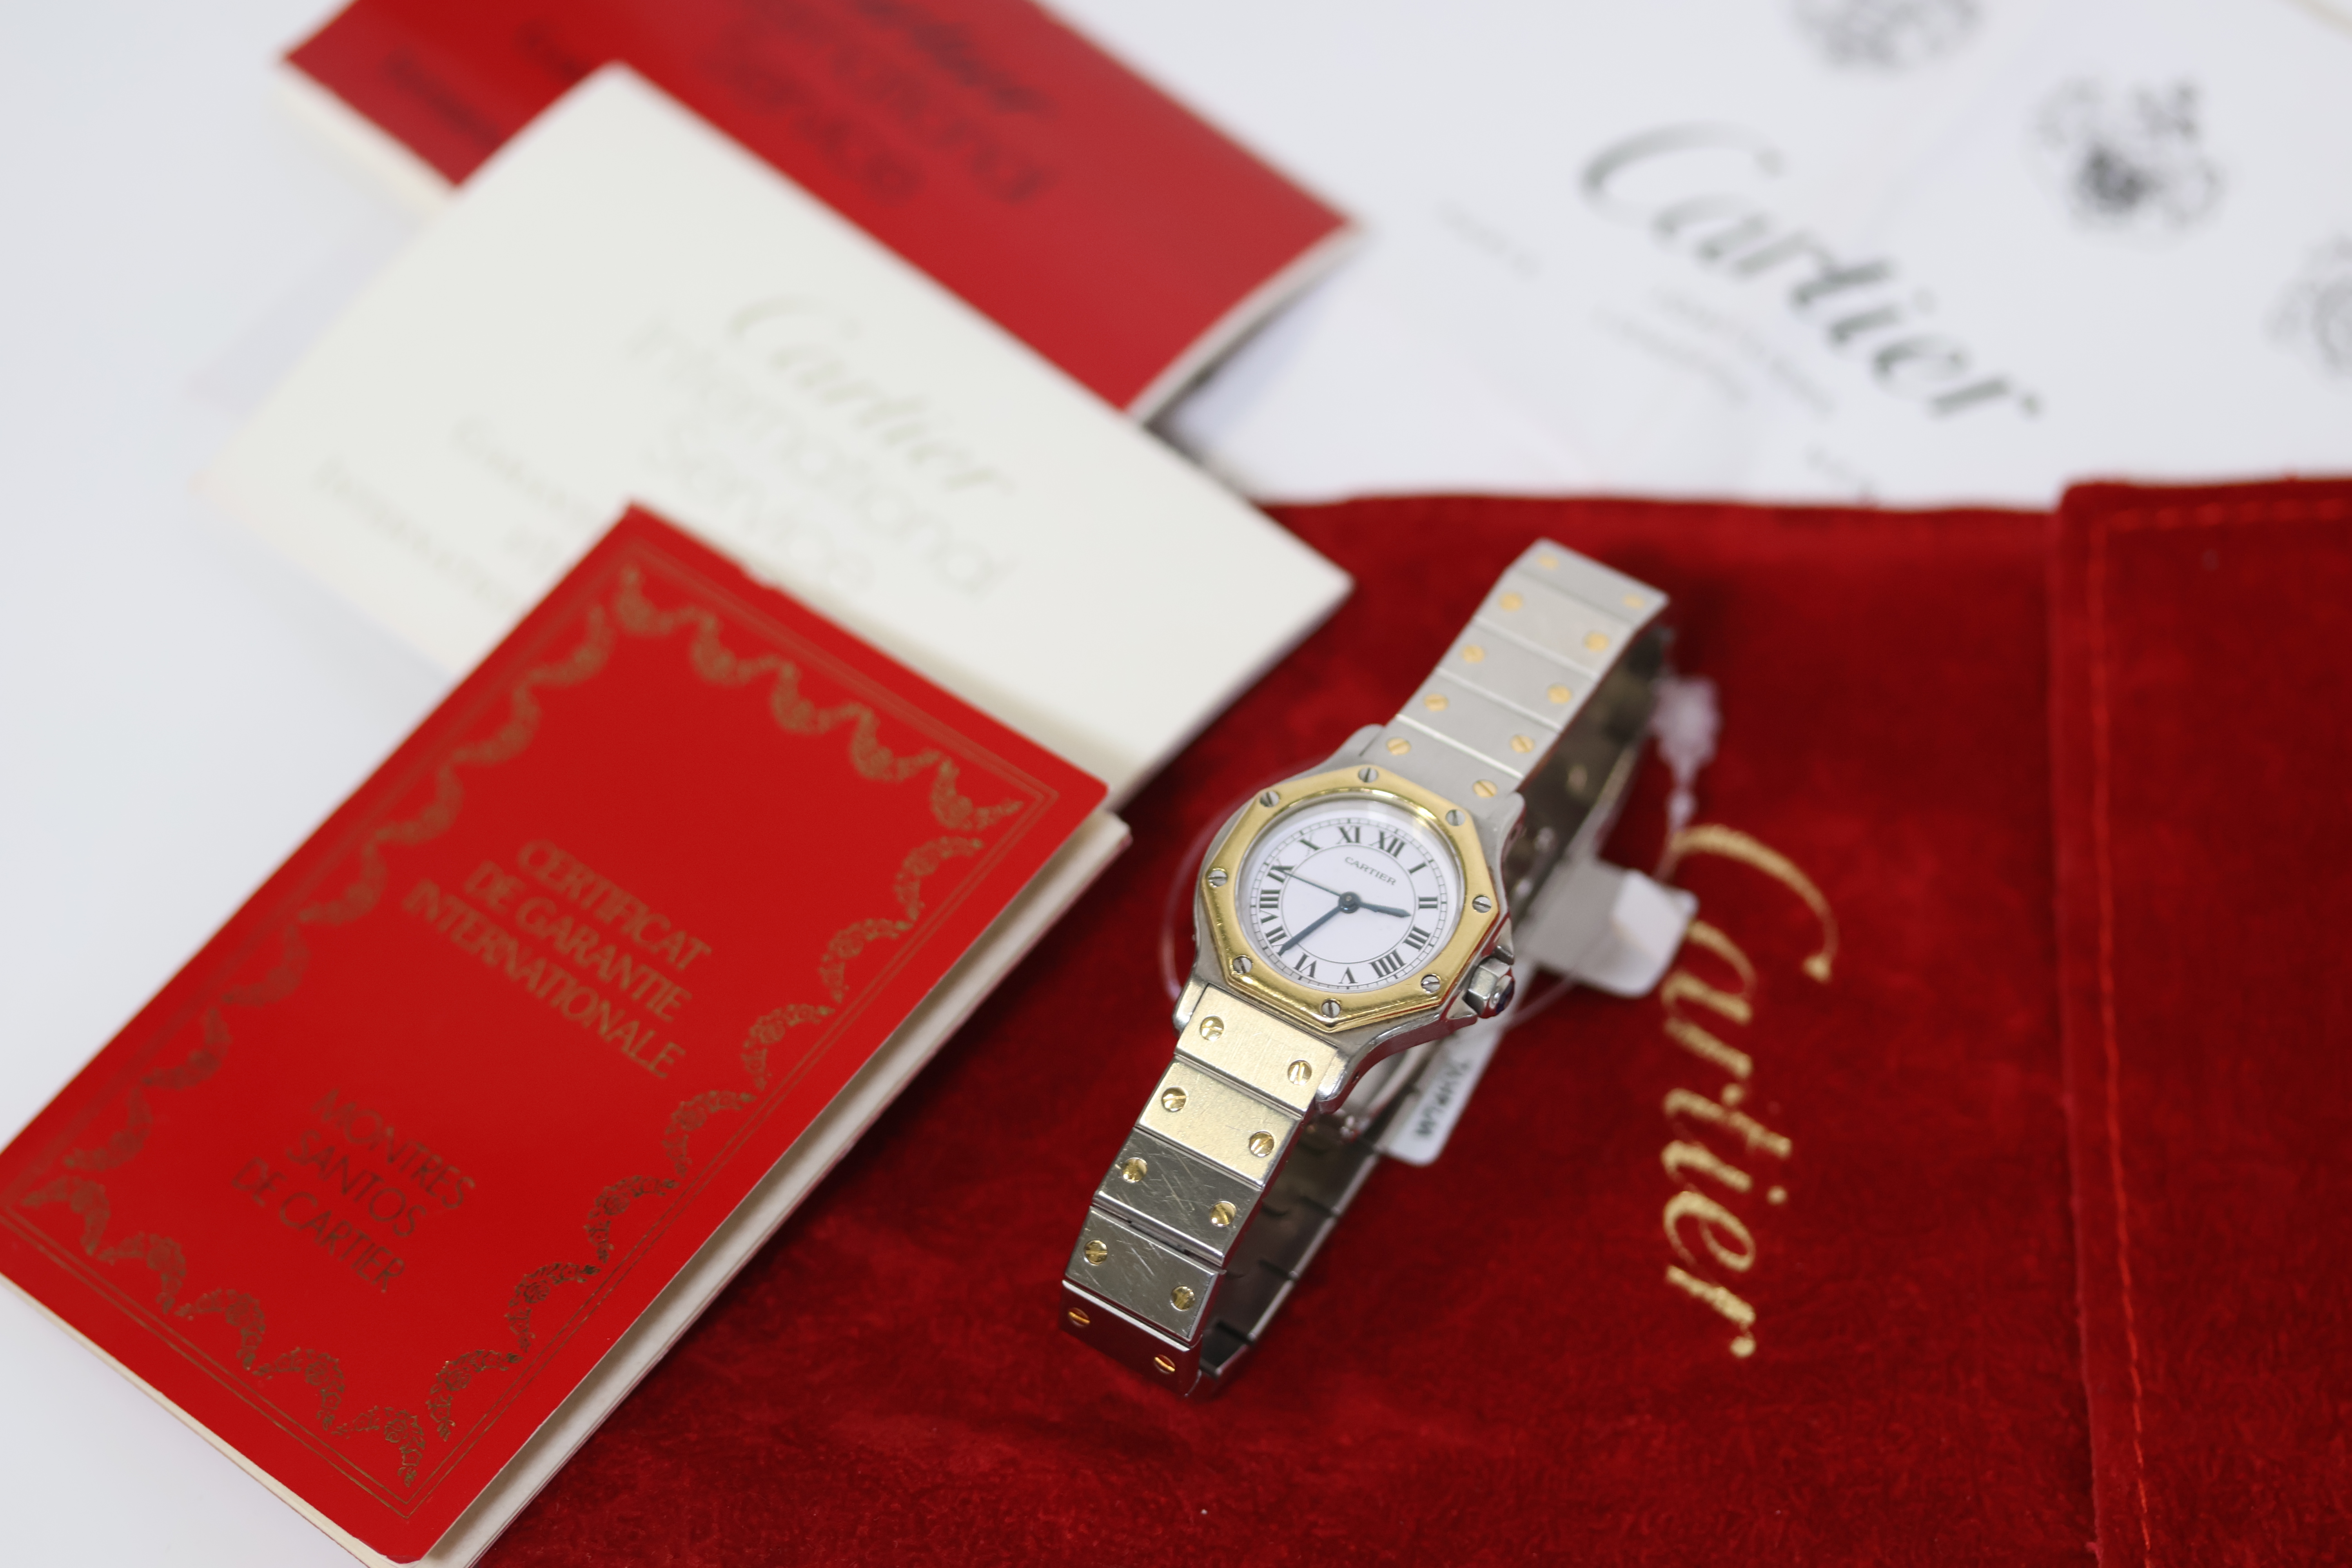 CARTIER SANTOS RONDE OCTOGON AUTOMATIC WITH PAPERS, white circular dial, gold octagonal bezel, - Image 5 of 7